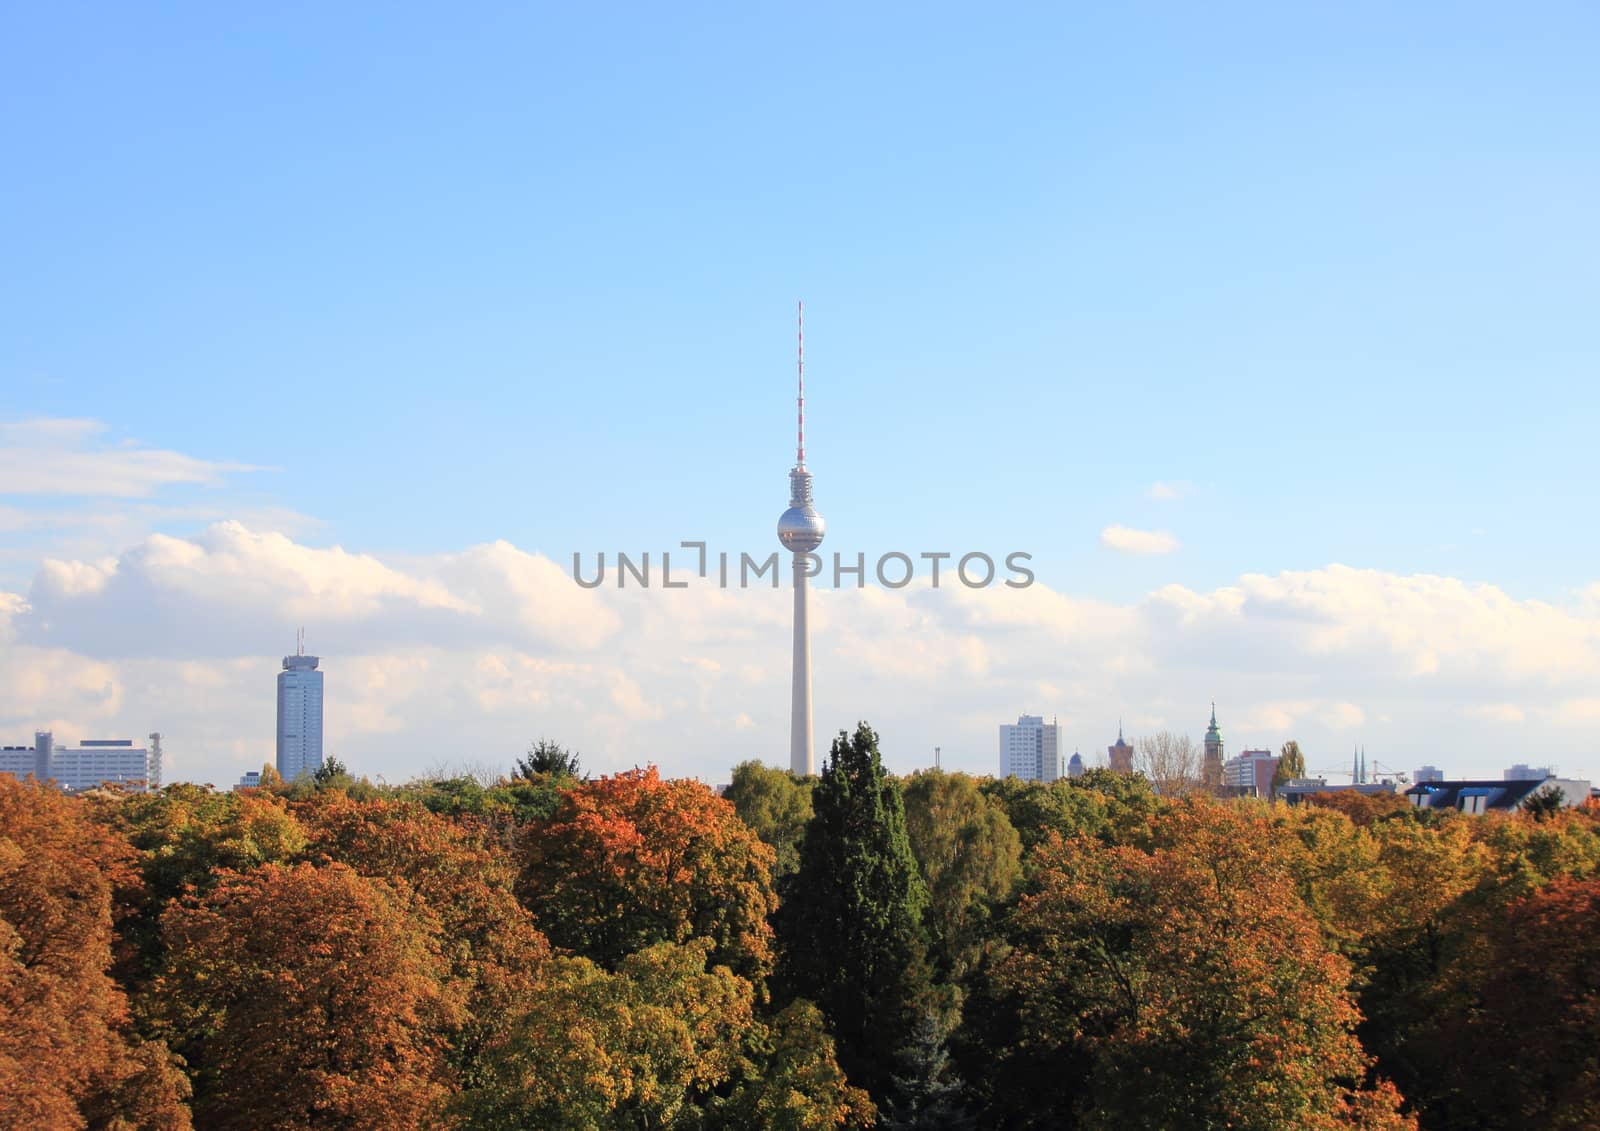 Skyline of Berlin Germany with autumn forest